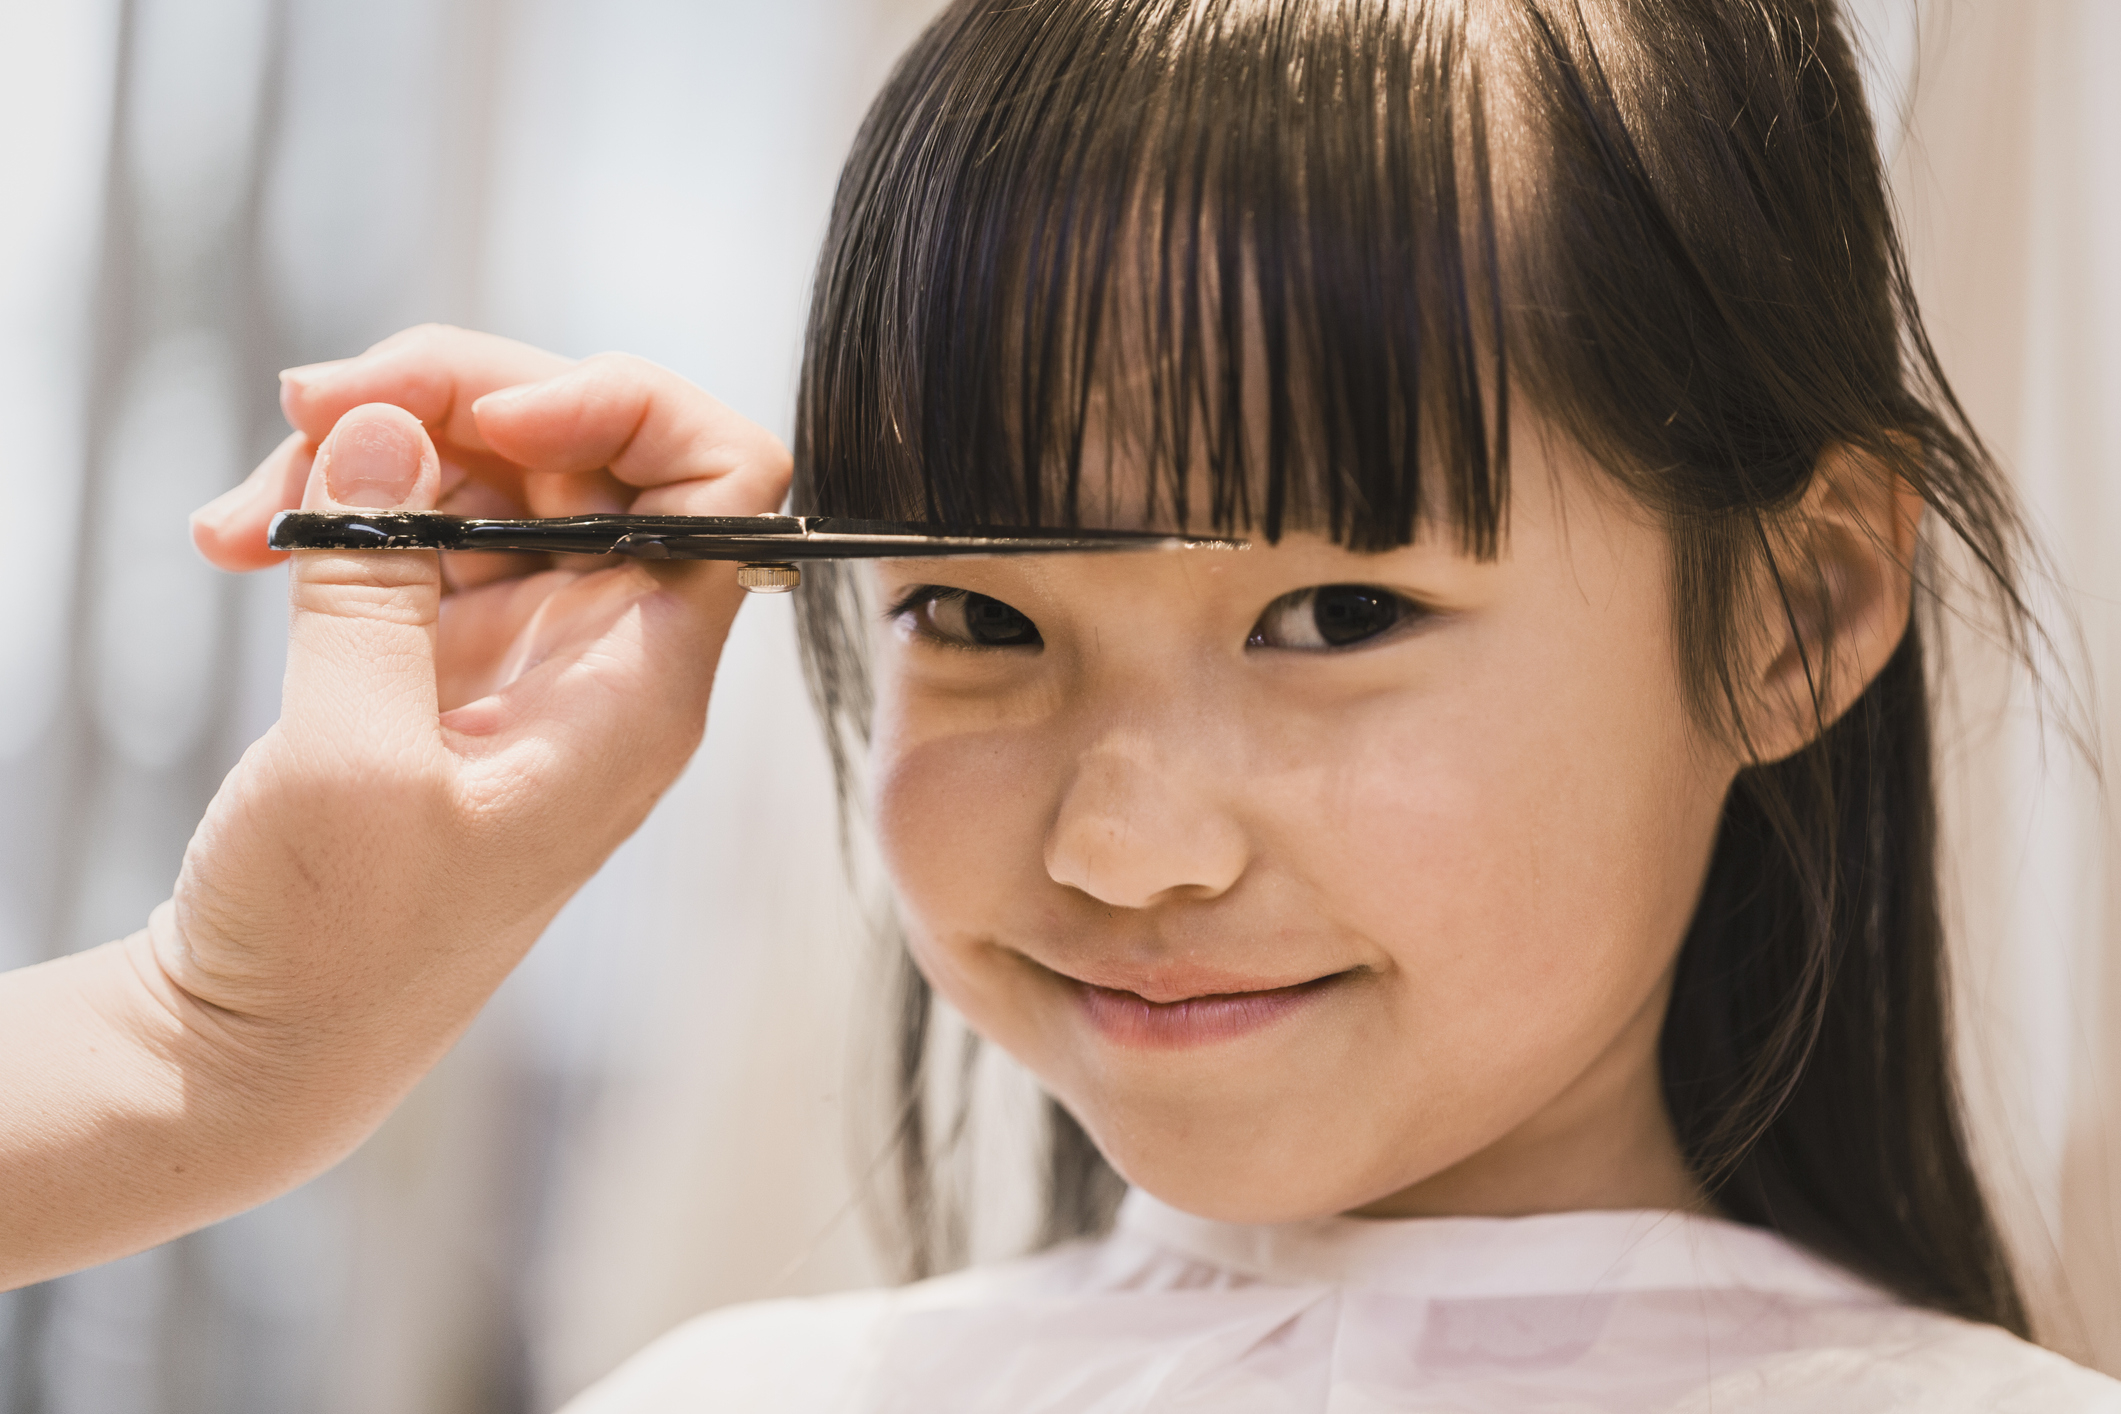 Child smiling during a haircut, bangs being trimmed